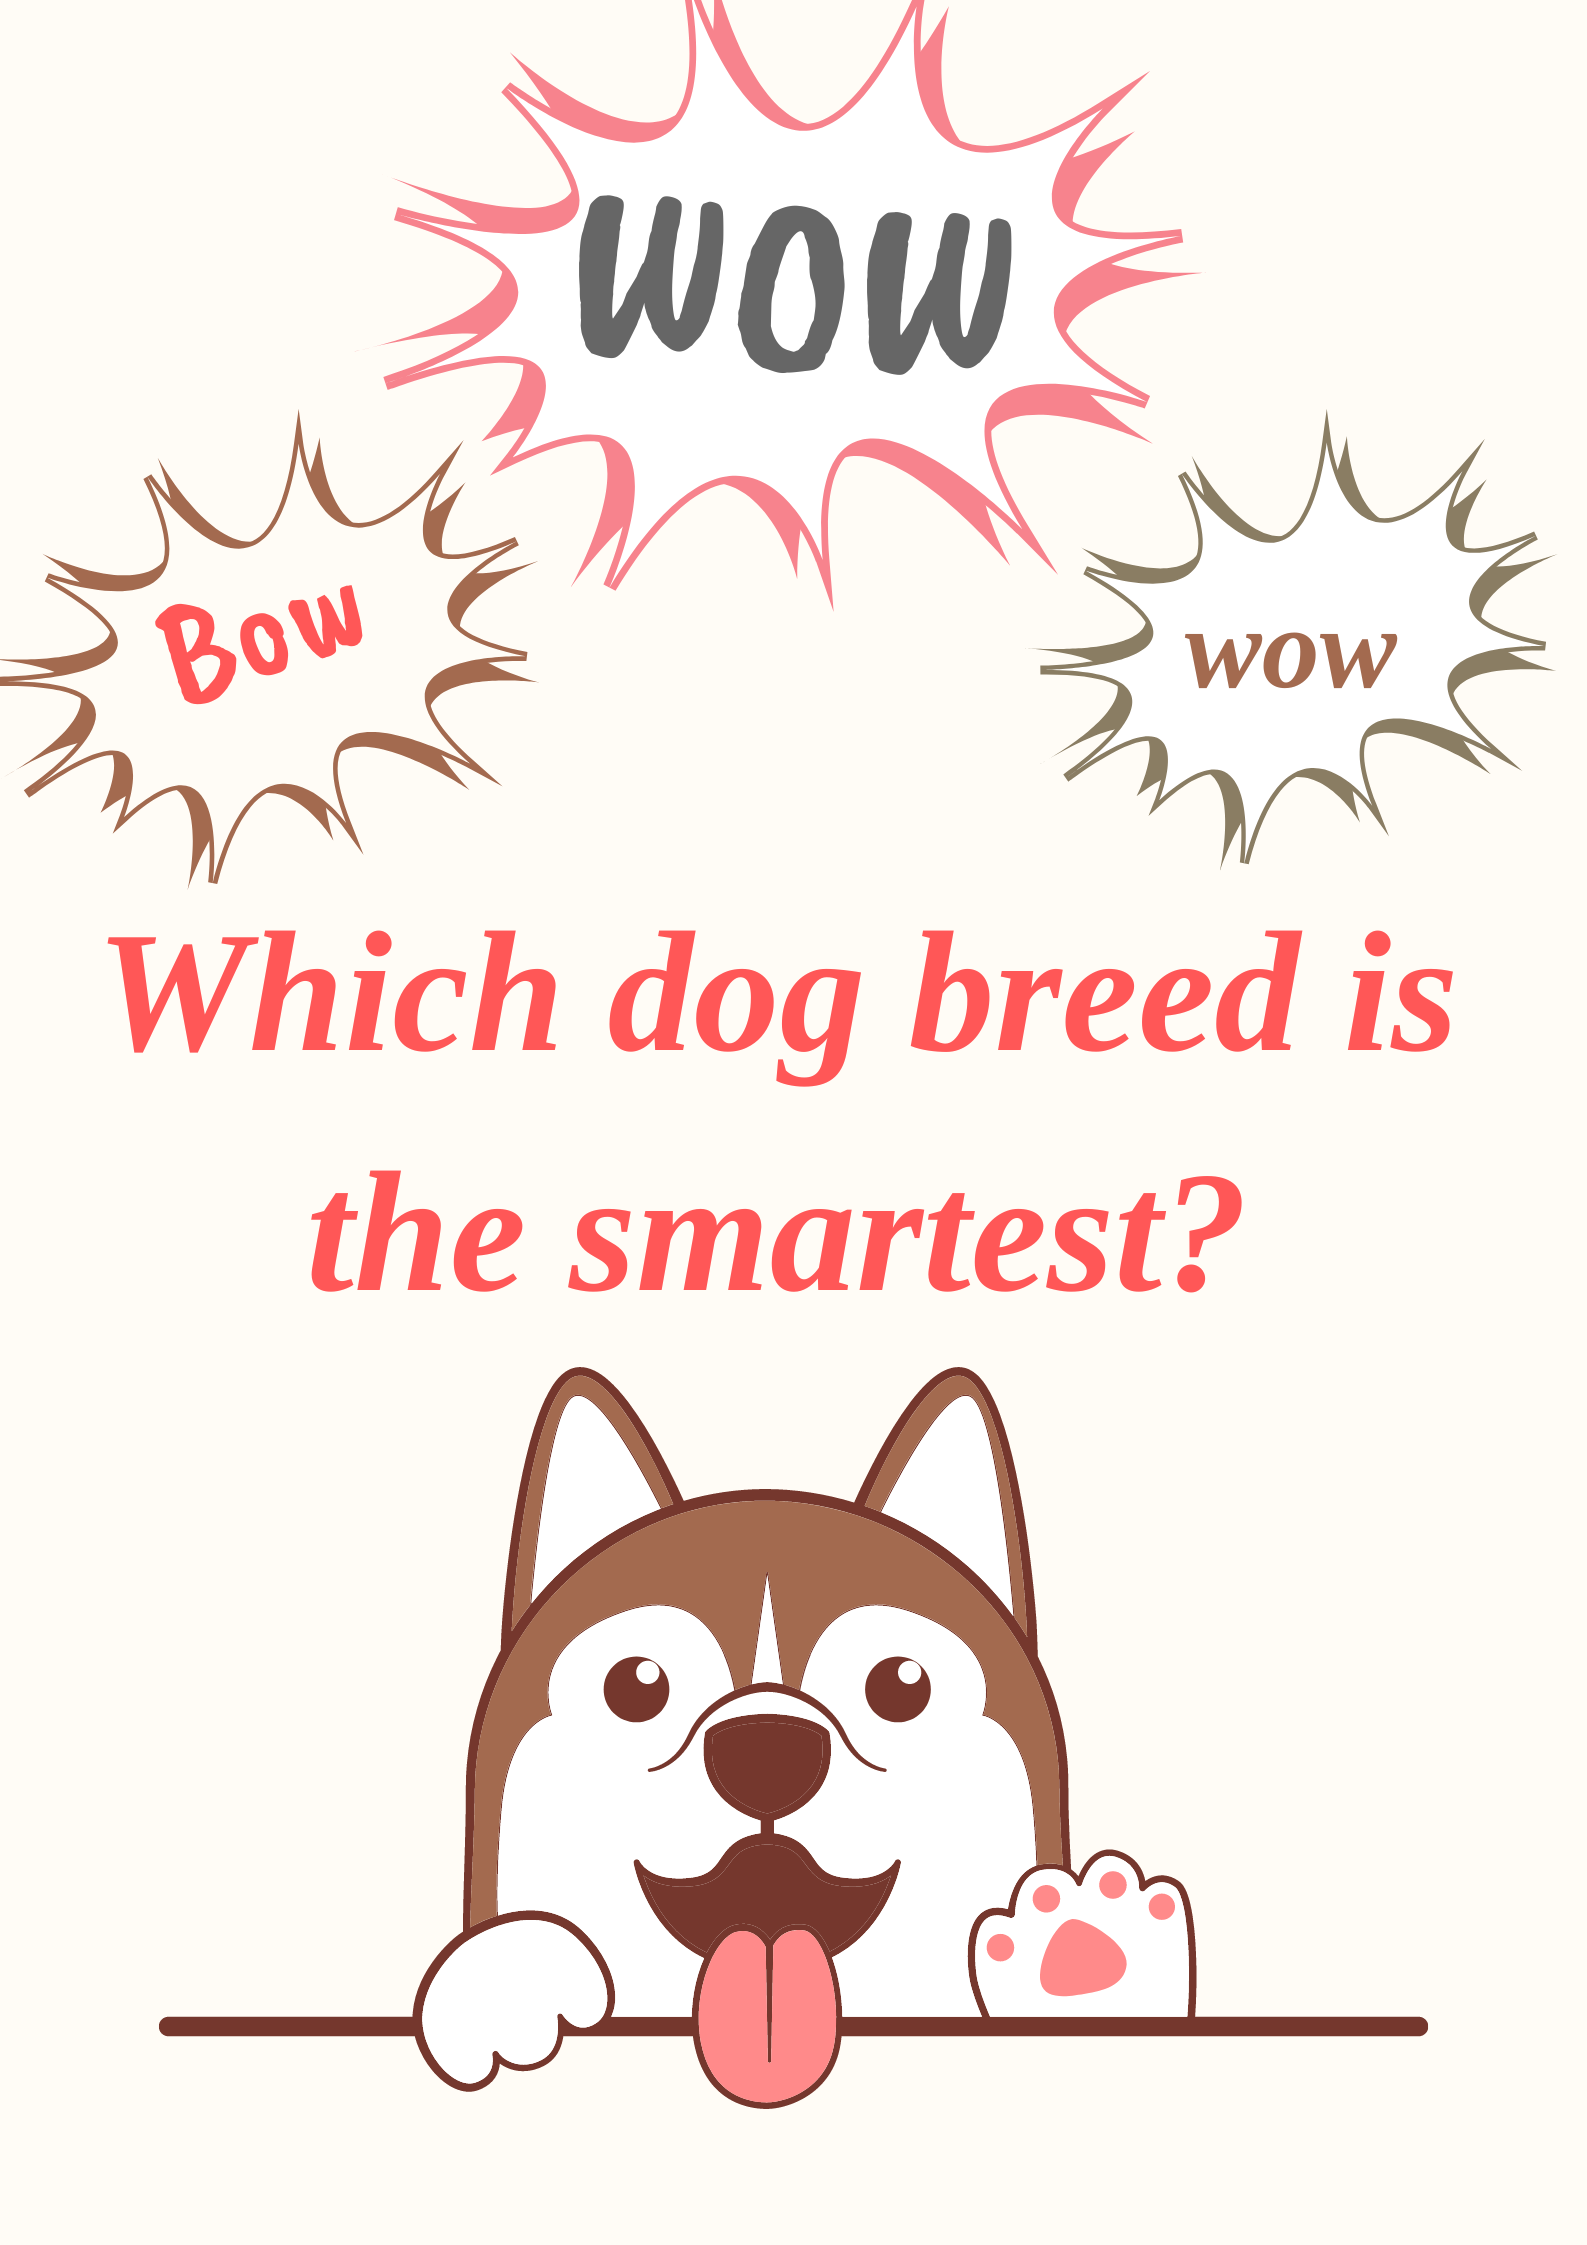 Which dog breed is the smartest